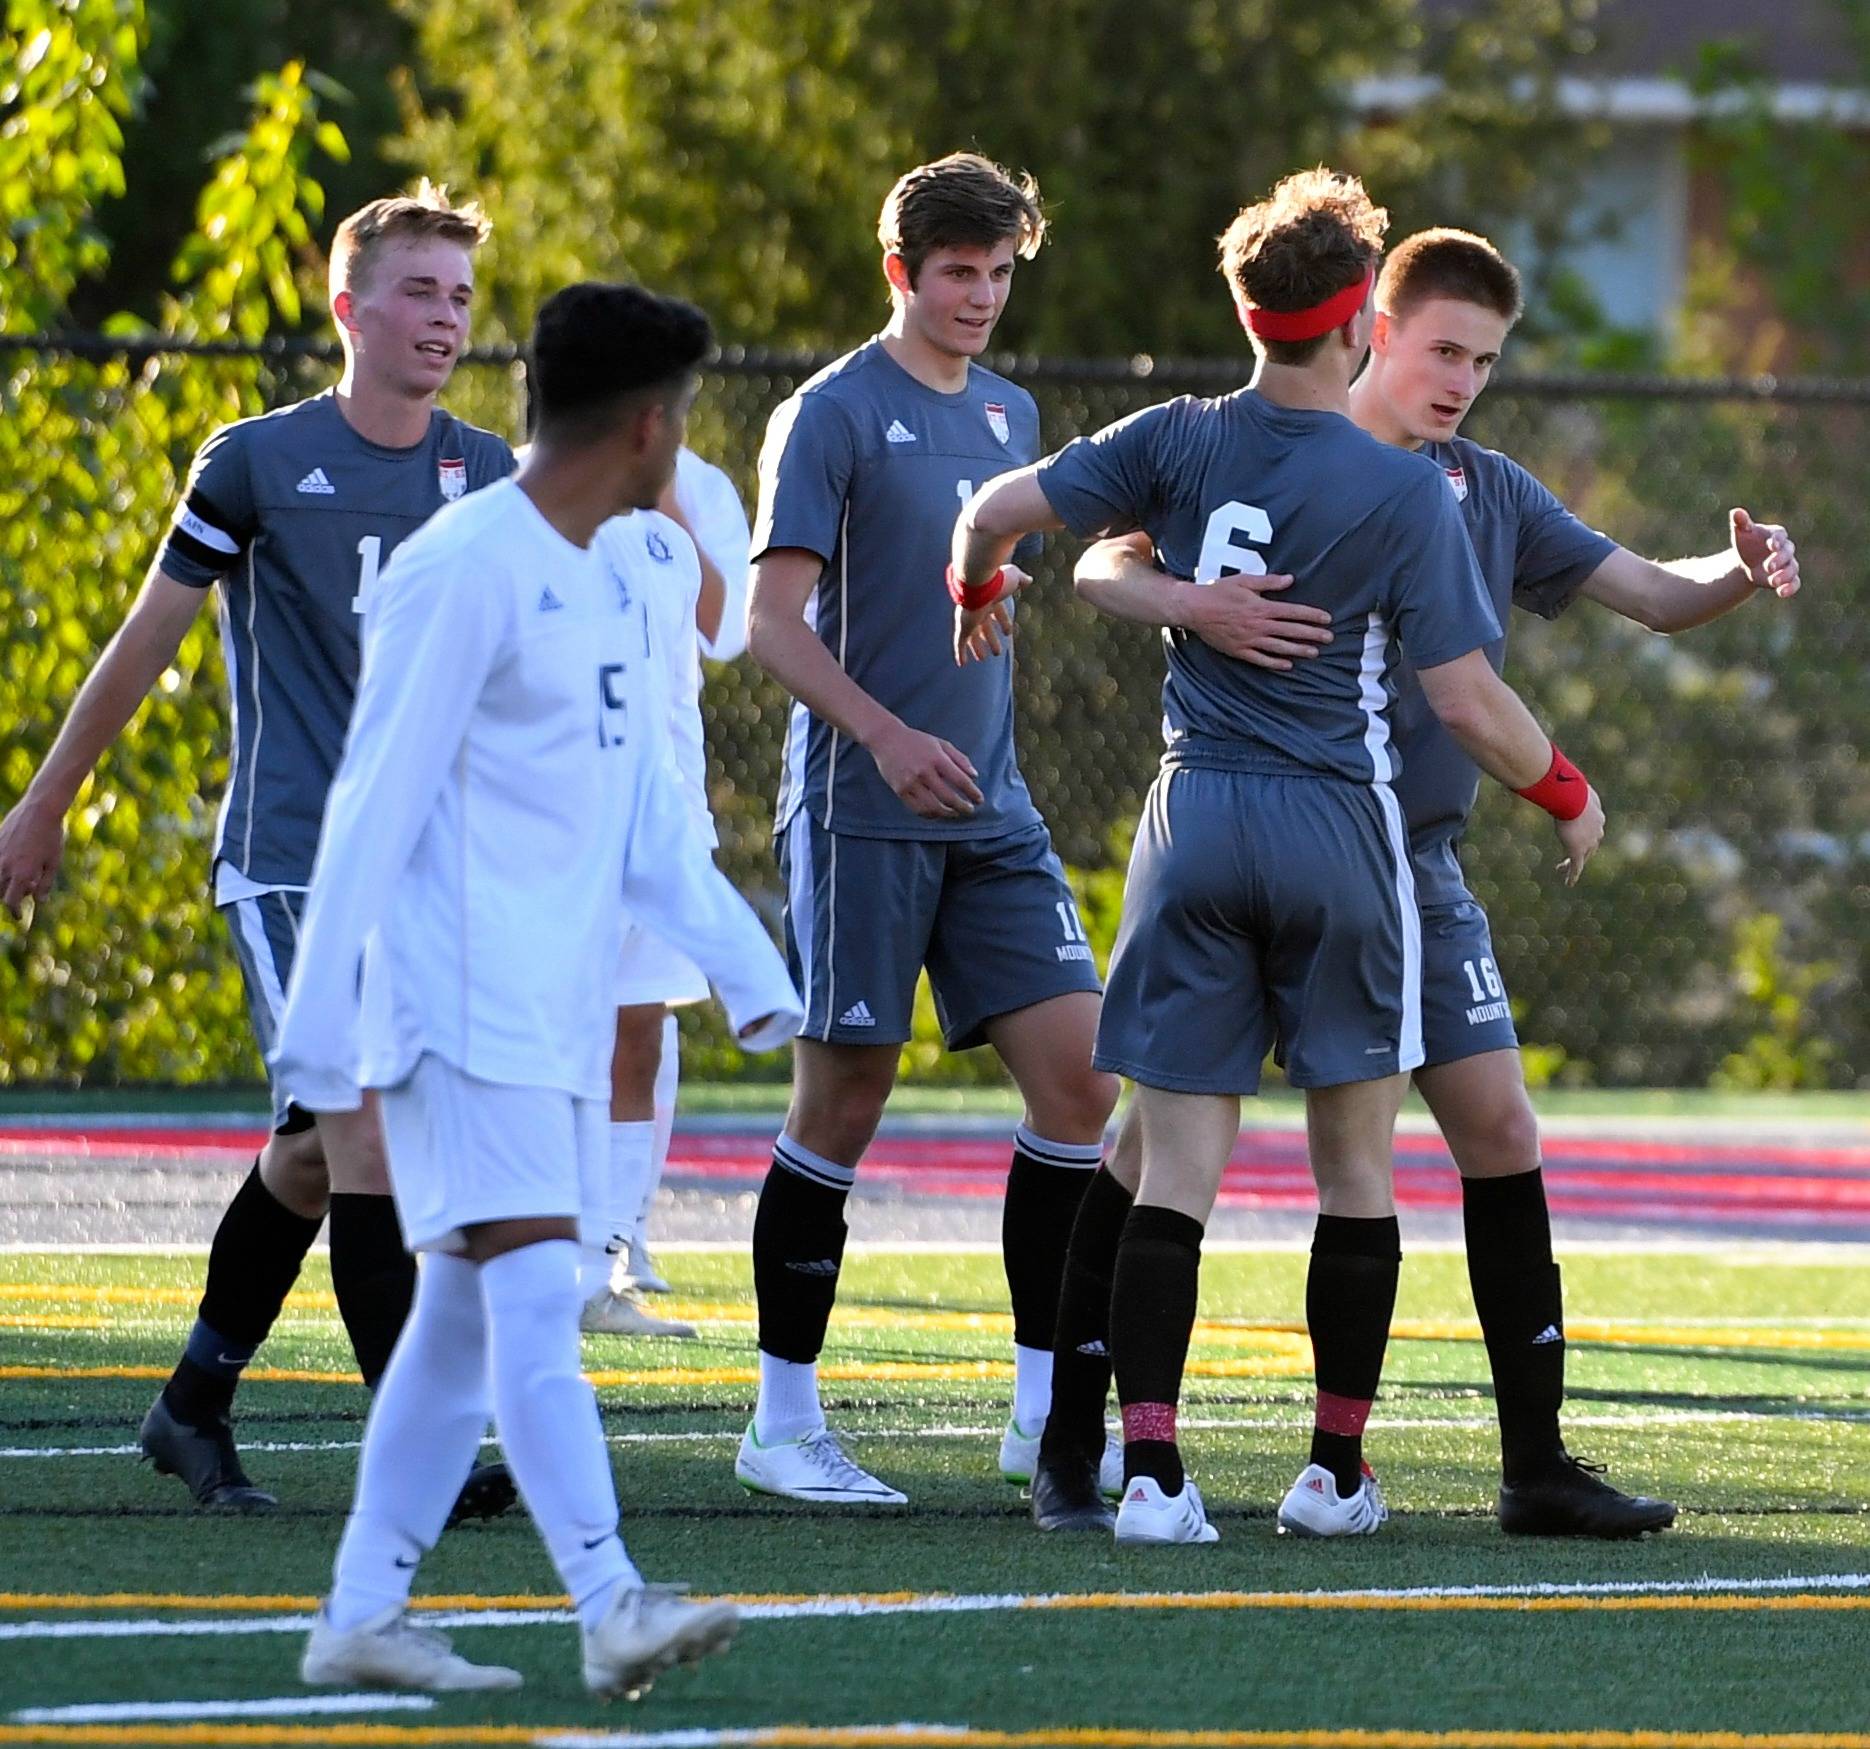 Mount Si soccer players celebrate a goal during the Wildcats’ 8-1 victory over Mariner on Tuesday in the 4A Wes-King District playoffs. Mount Si will host Jackson in the title match at 7 p.m. Thursday. Both teams have advanced to state. Photo courtesy of Calder Productions